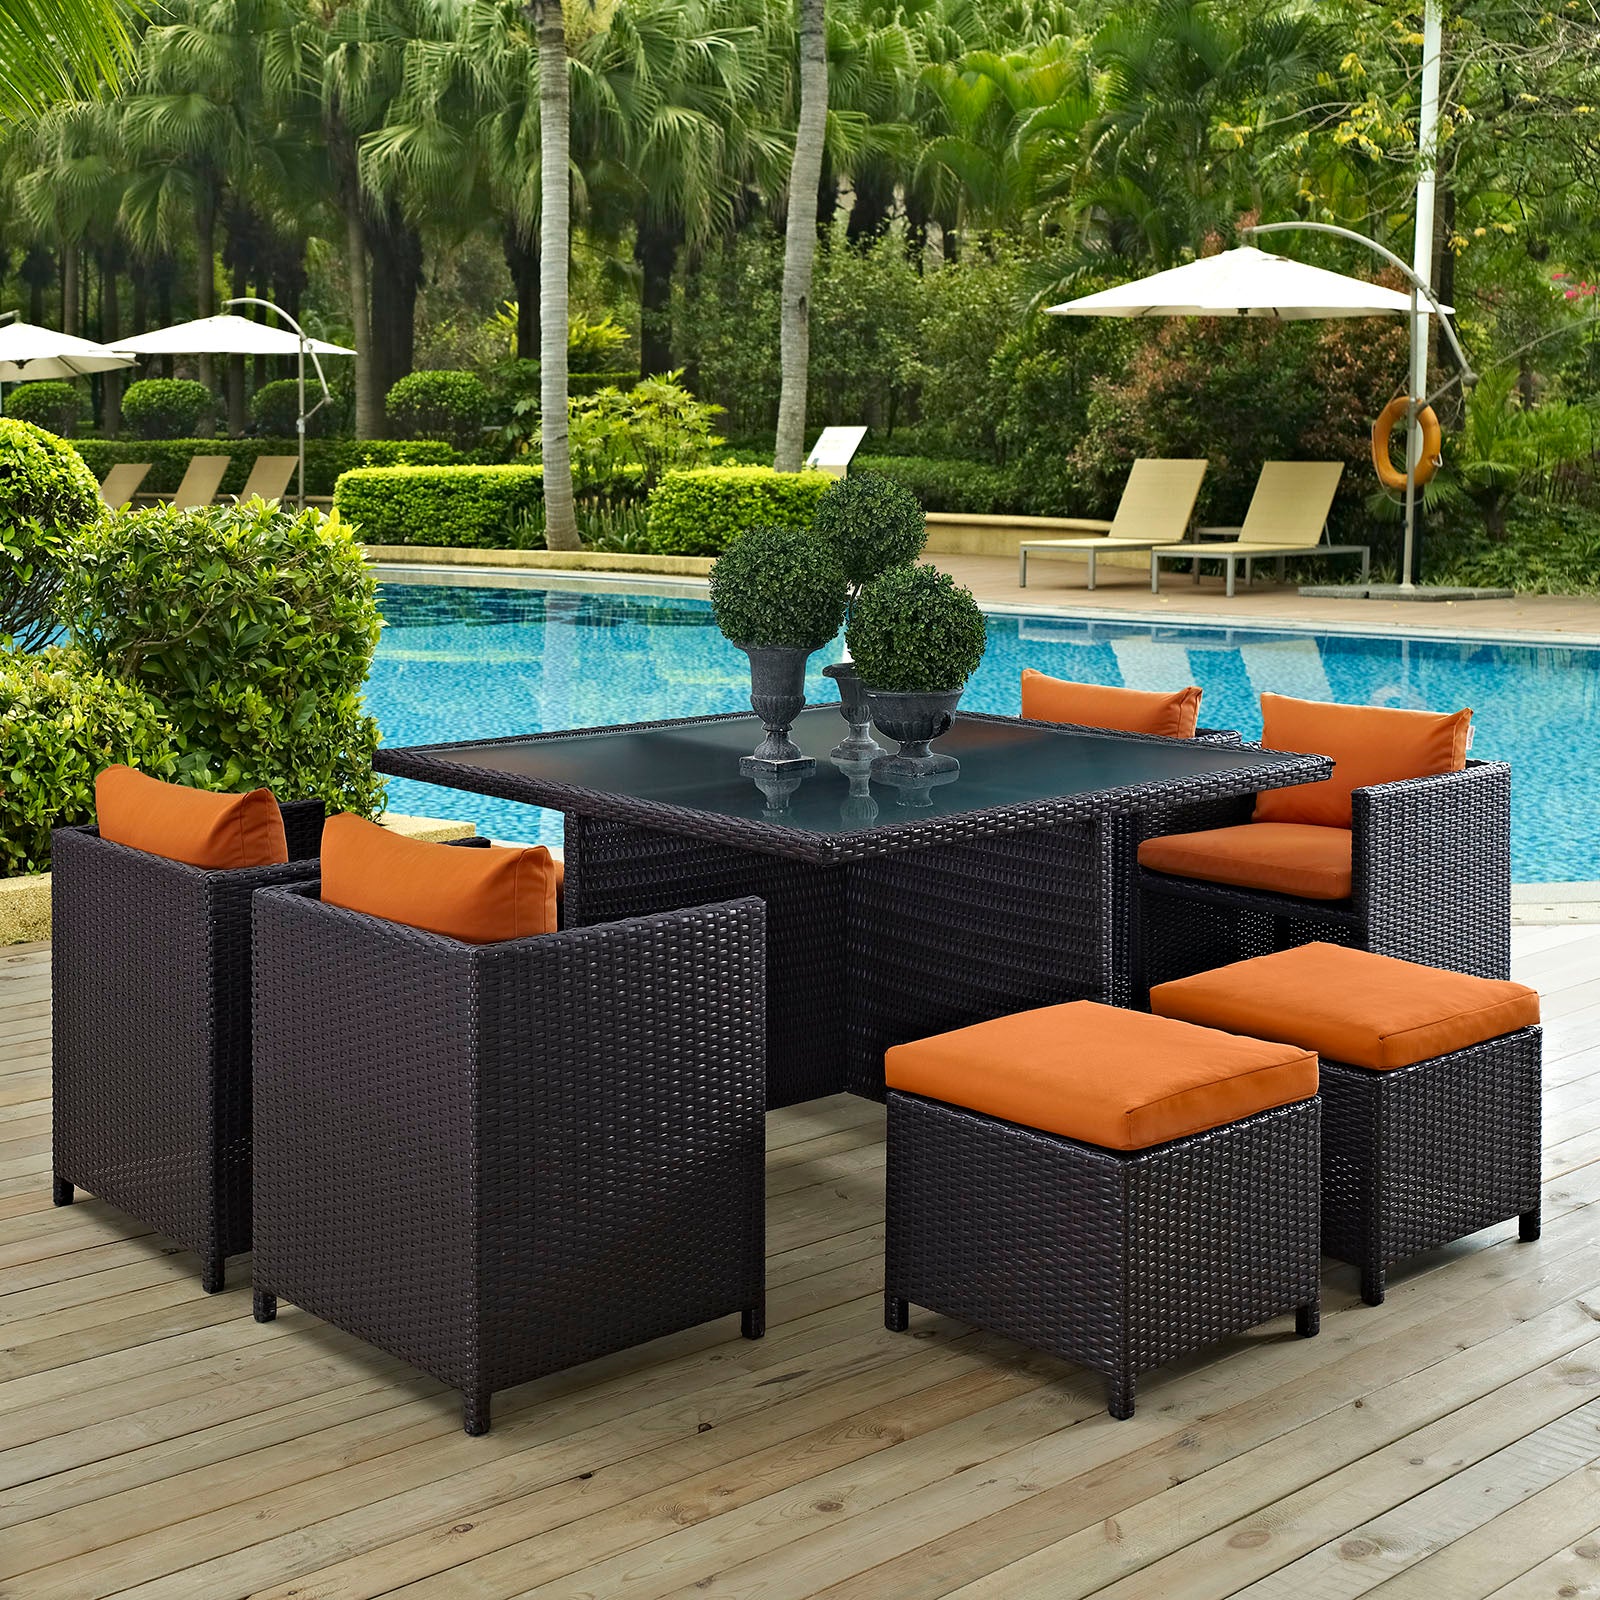 Inverse 9 Piece Outdoor Patio Dining Set - East Shore Modern Home Furnishings